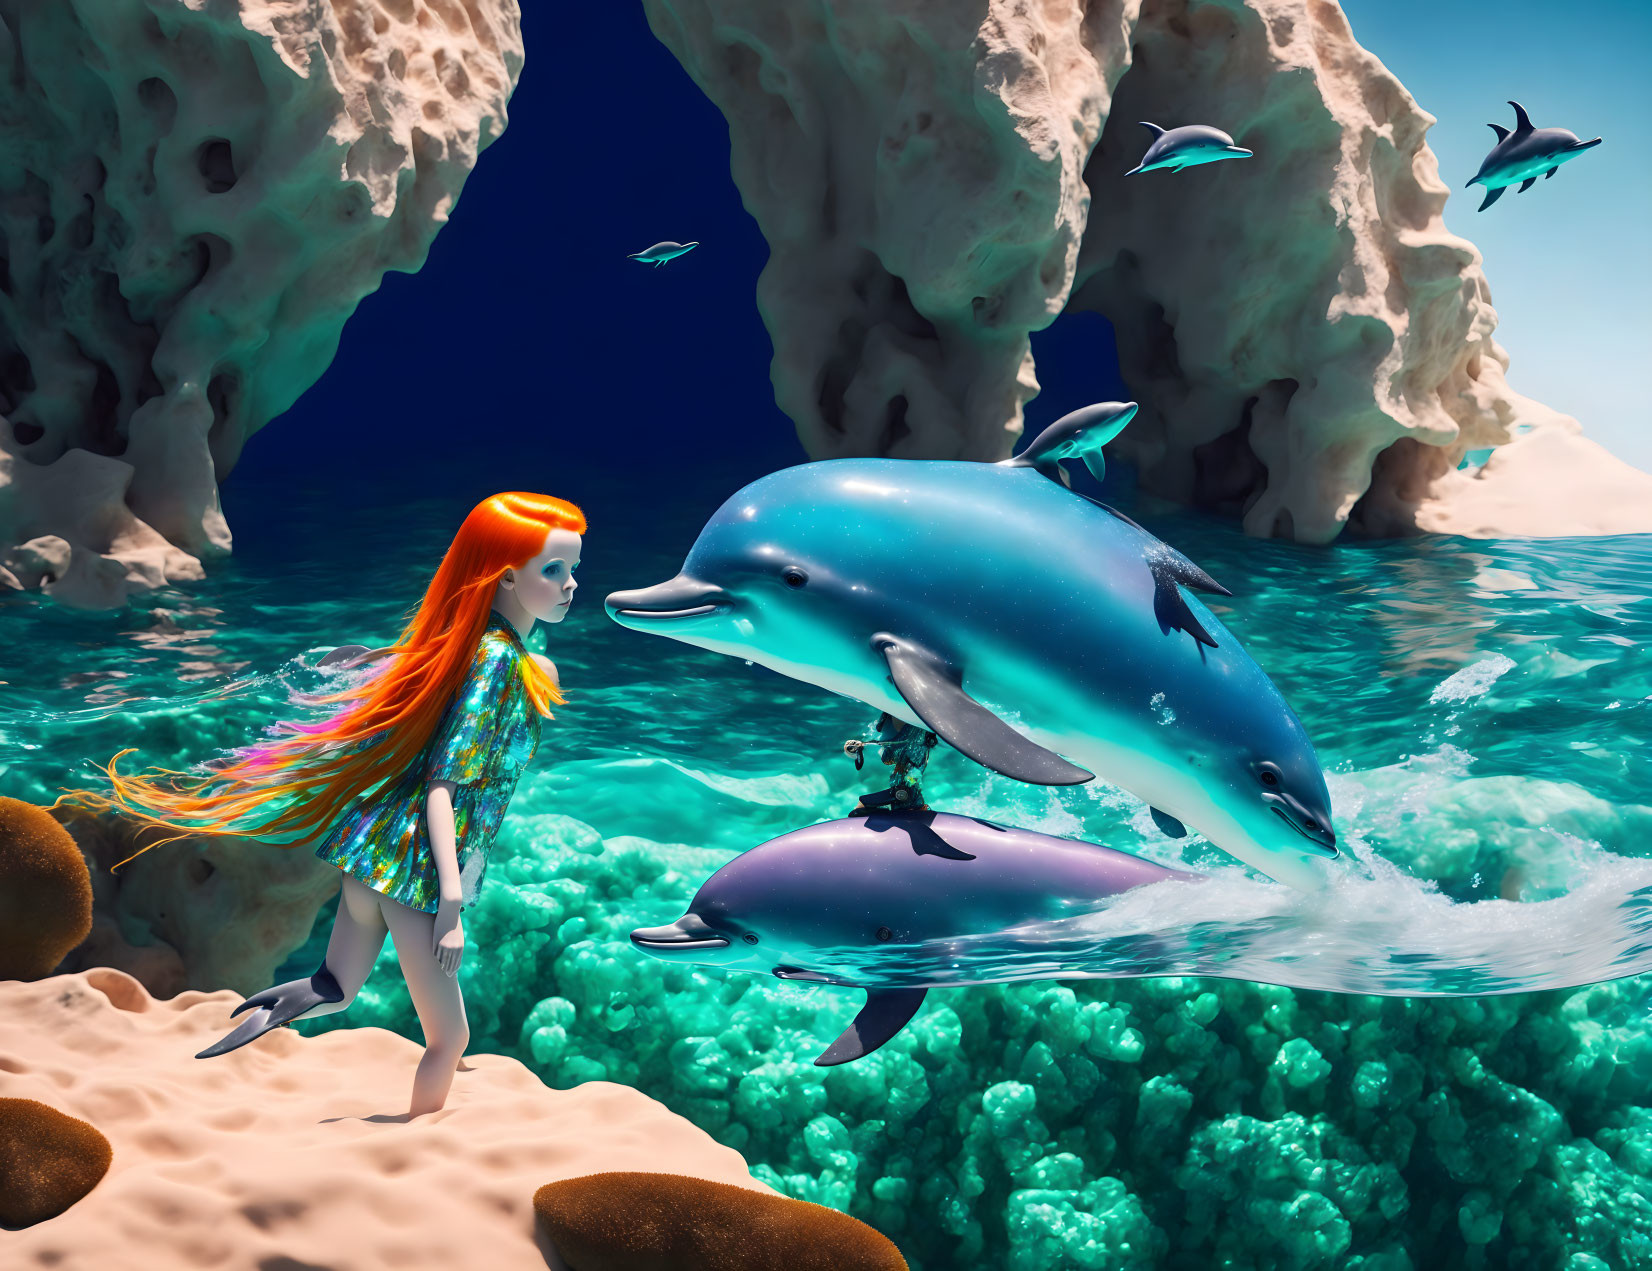 Red-headed girl underwater with fish, corals, and dolphins by rocky formations